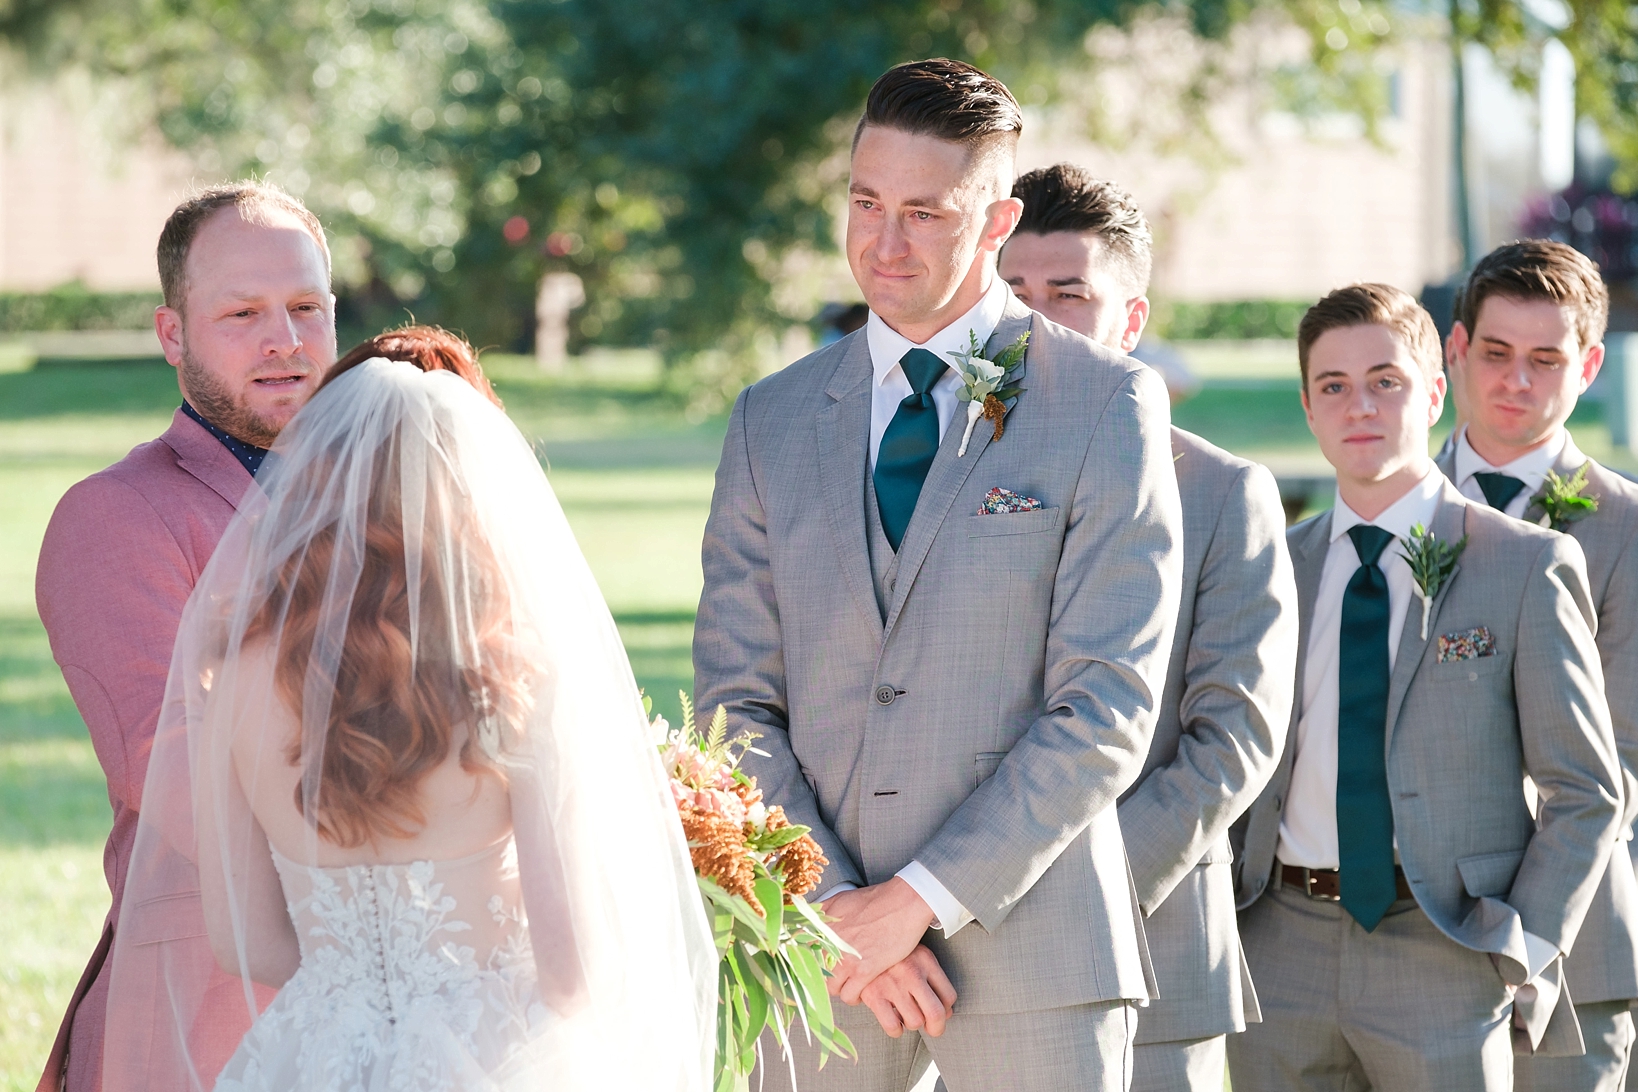 Groom begins to tear up during the vows of his Bride